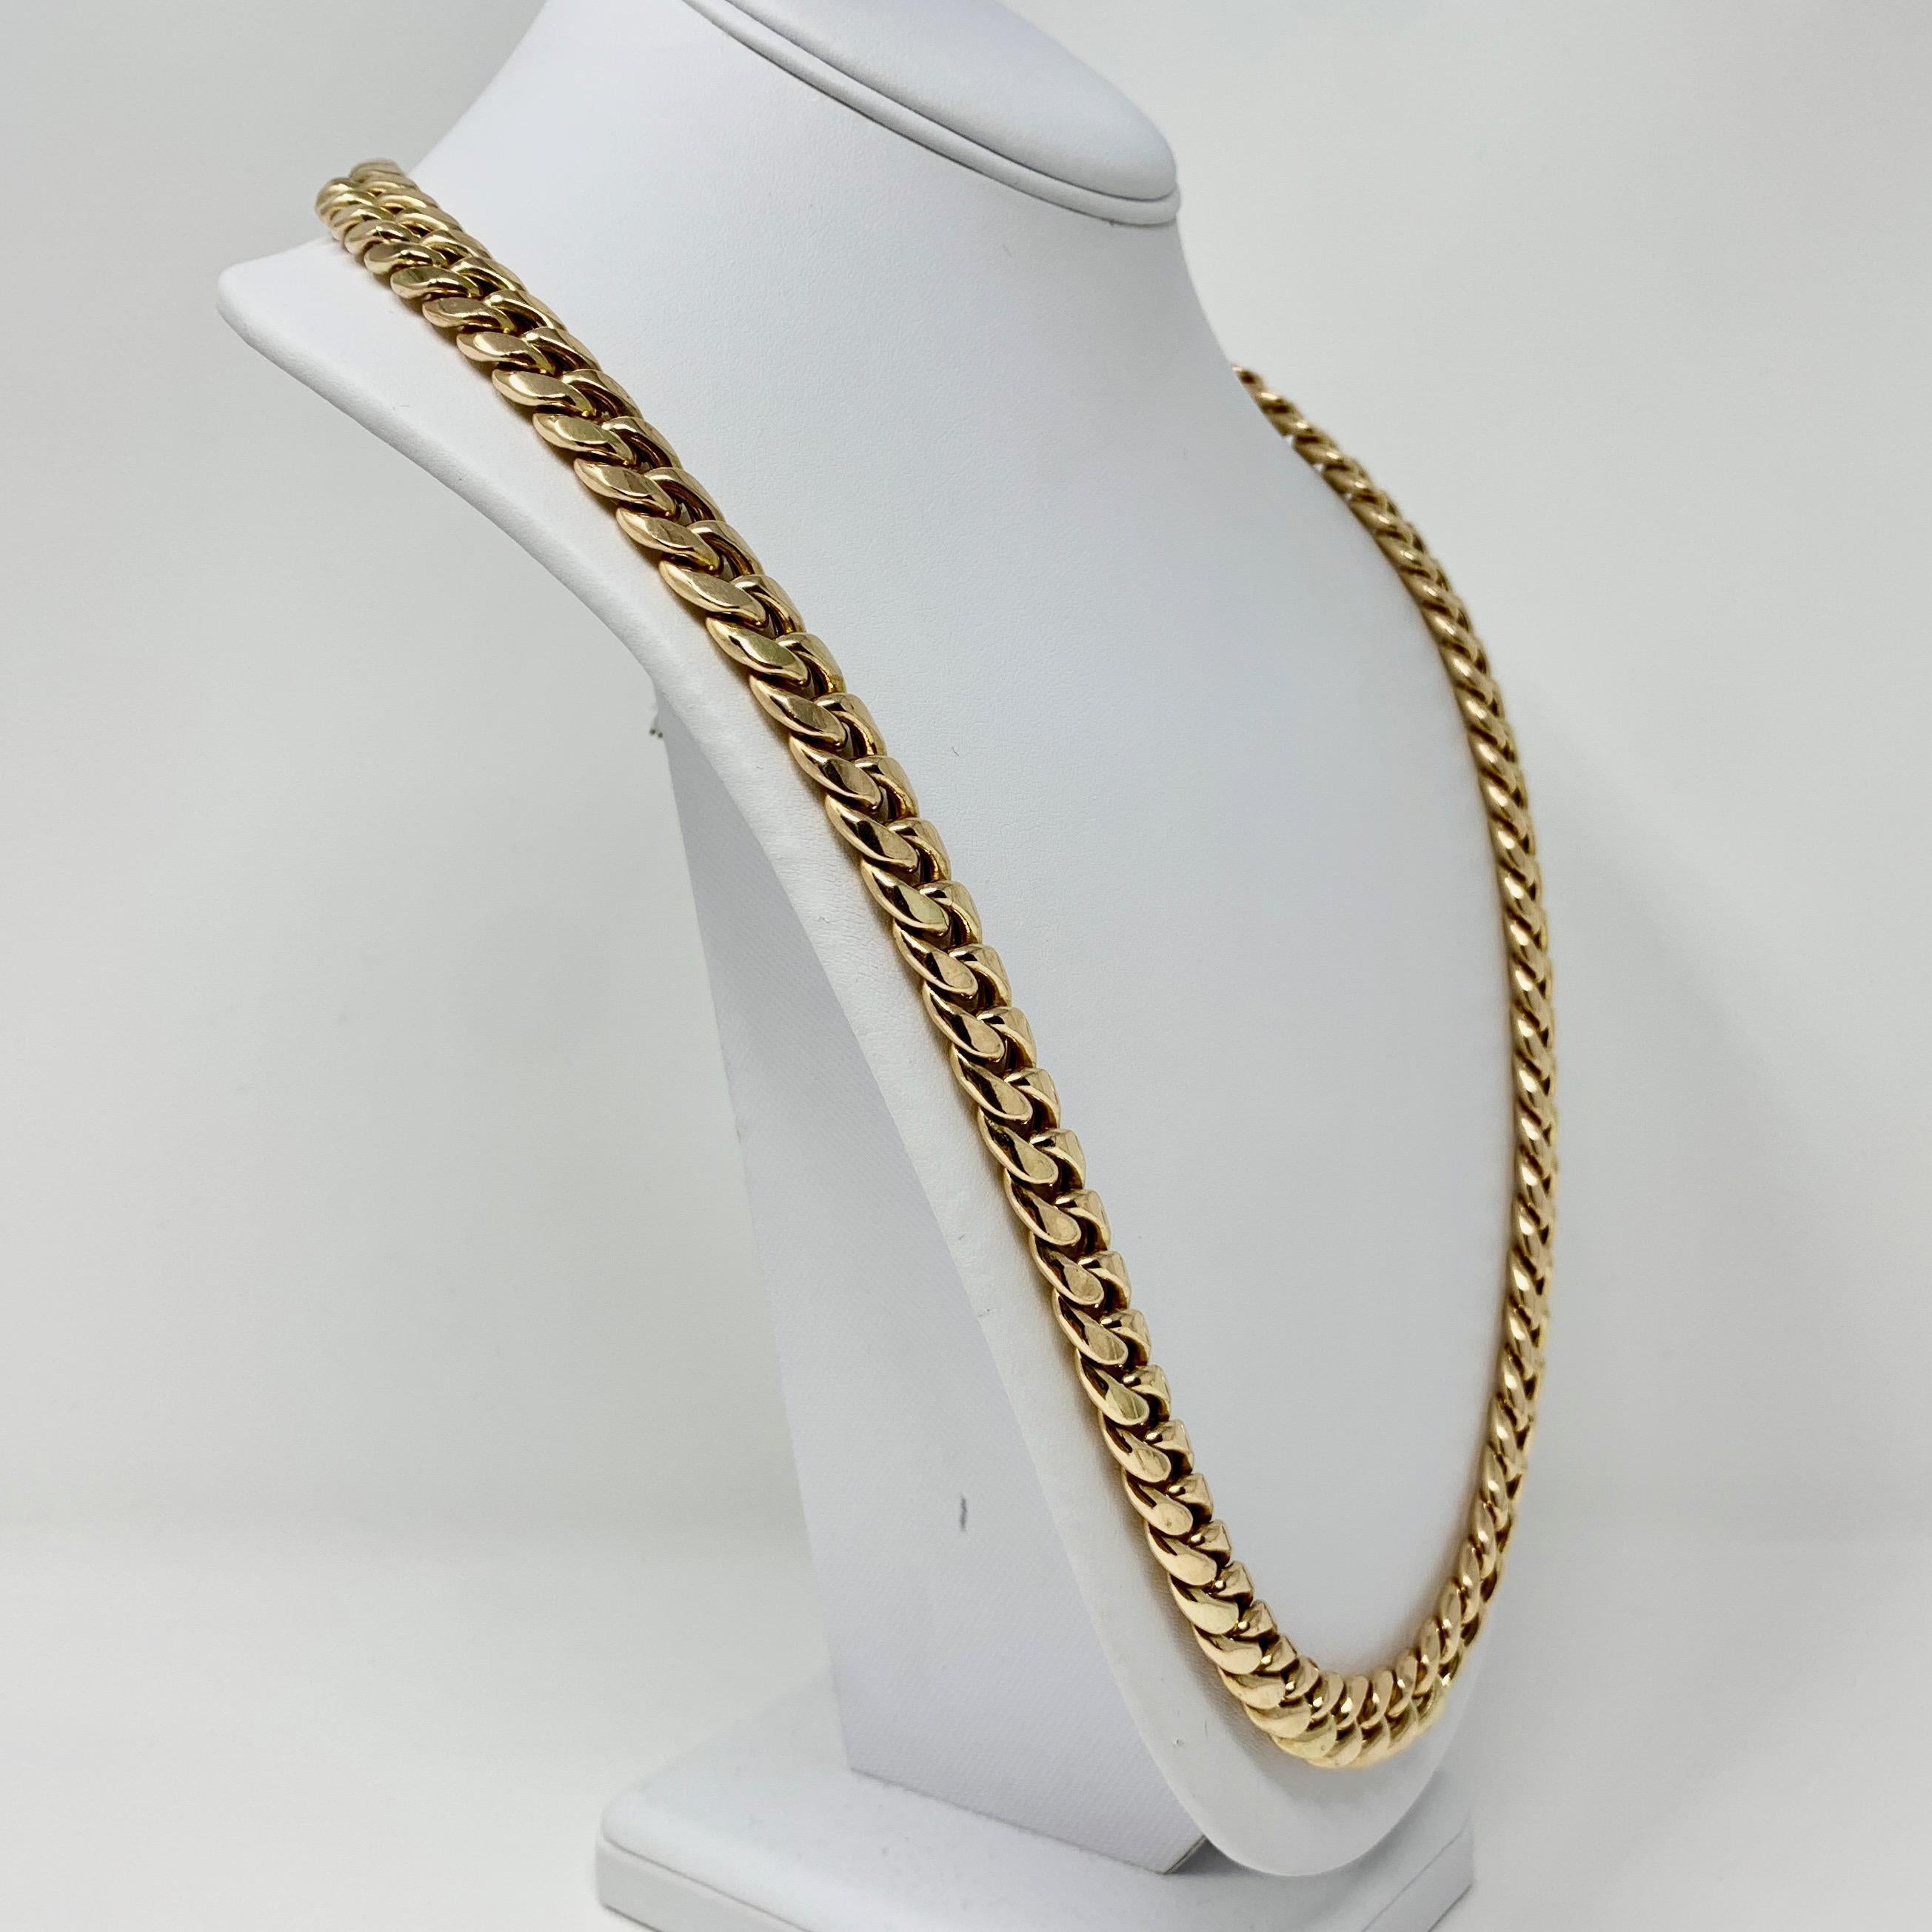 10k Yellow Gold 78.5g Heavy Hollow 11mm Cuban Curb Link Chain Necklace 28